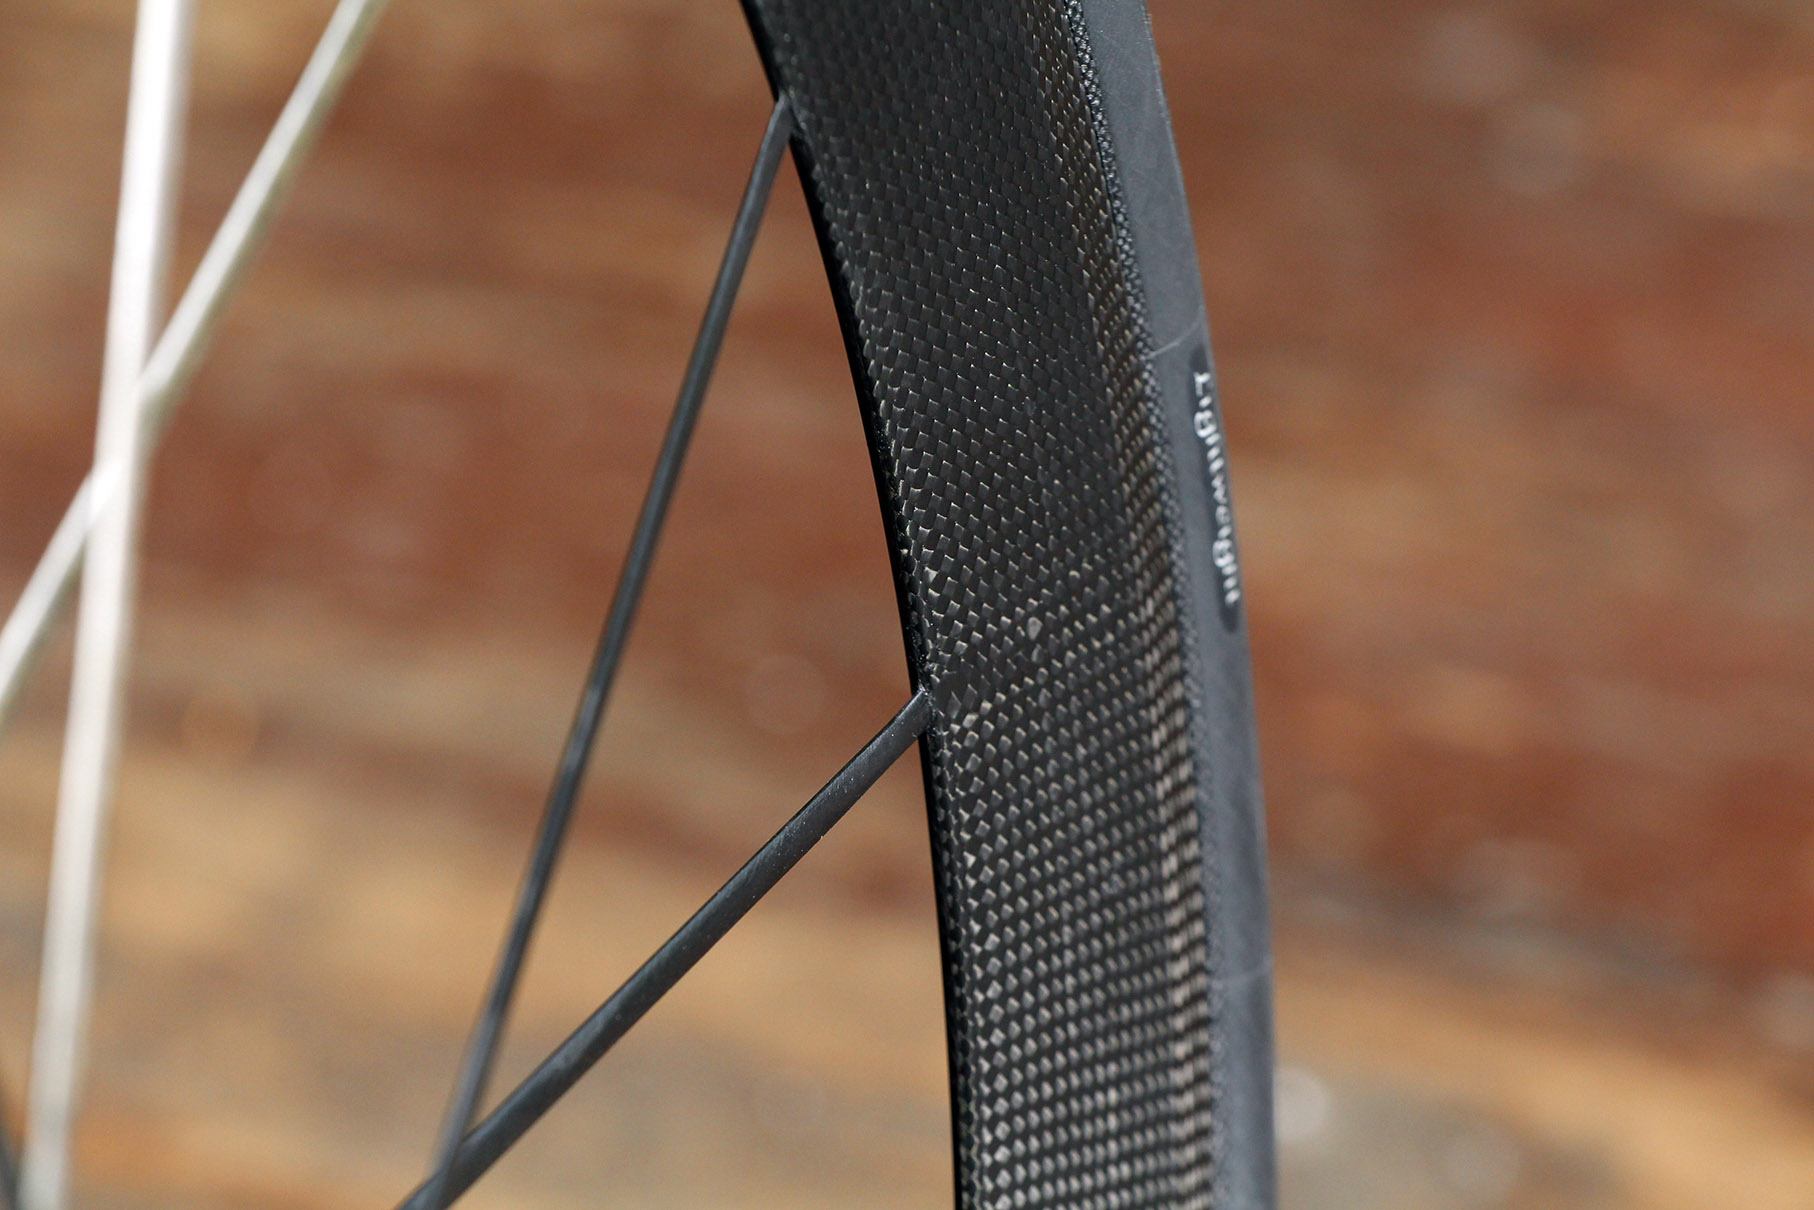 lightest clincher tyres